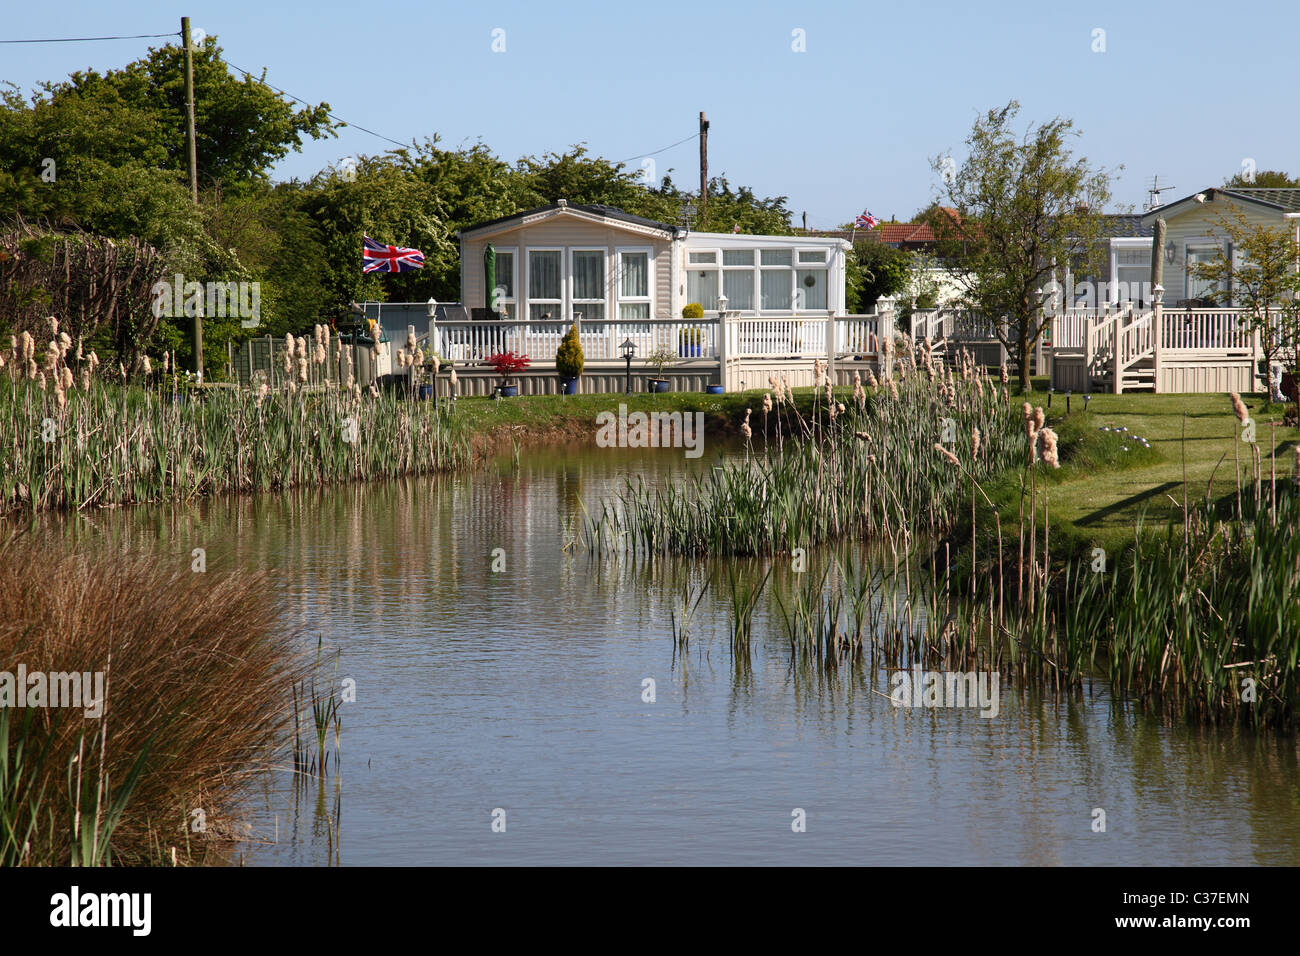 A static caravan holiday home on a site in Lincolnshire, England, U.K. Stock Photo